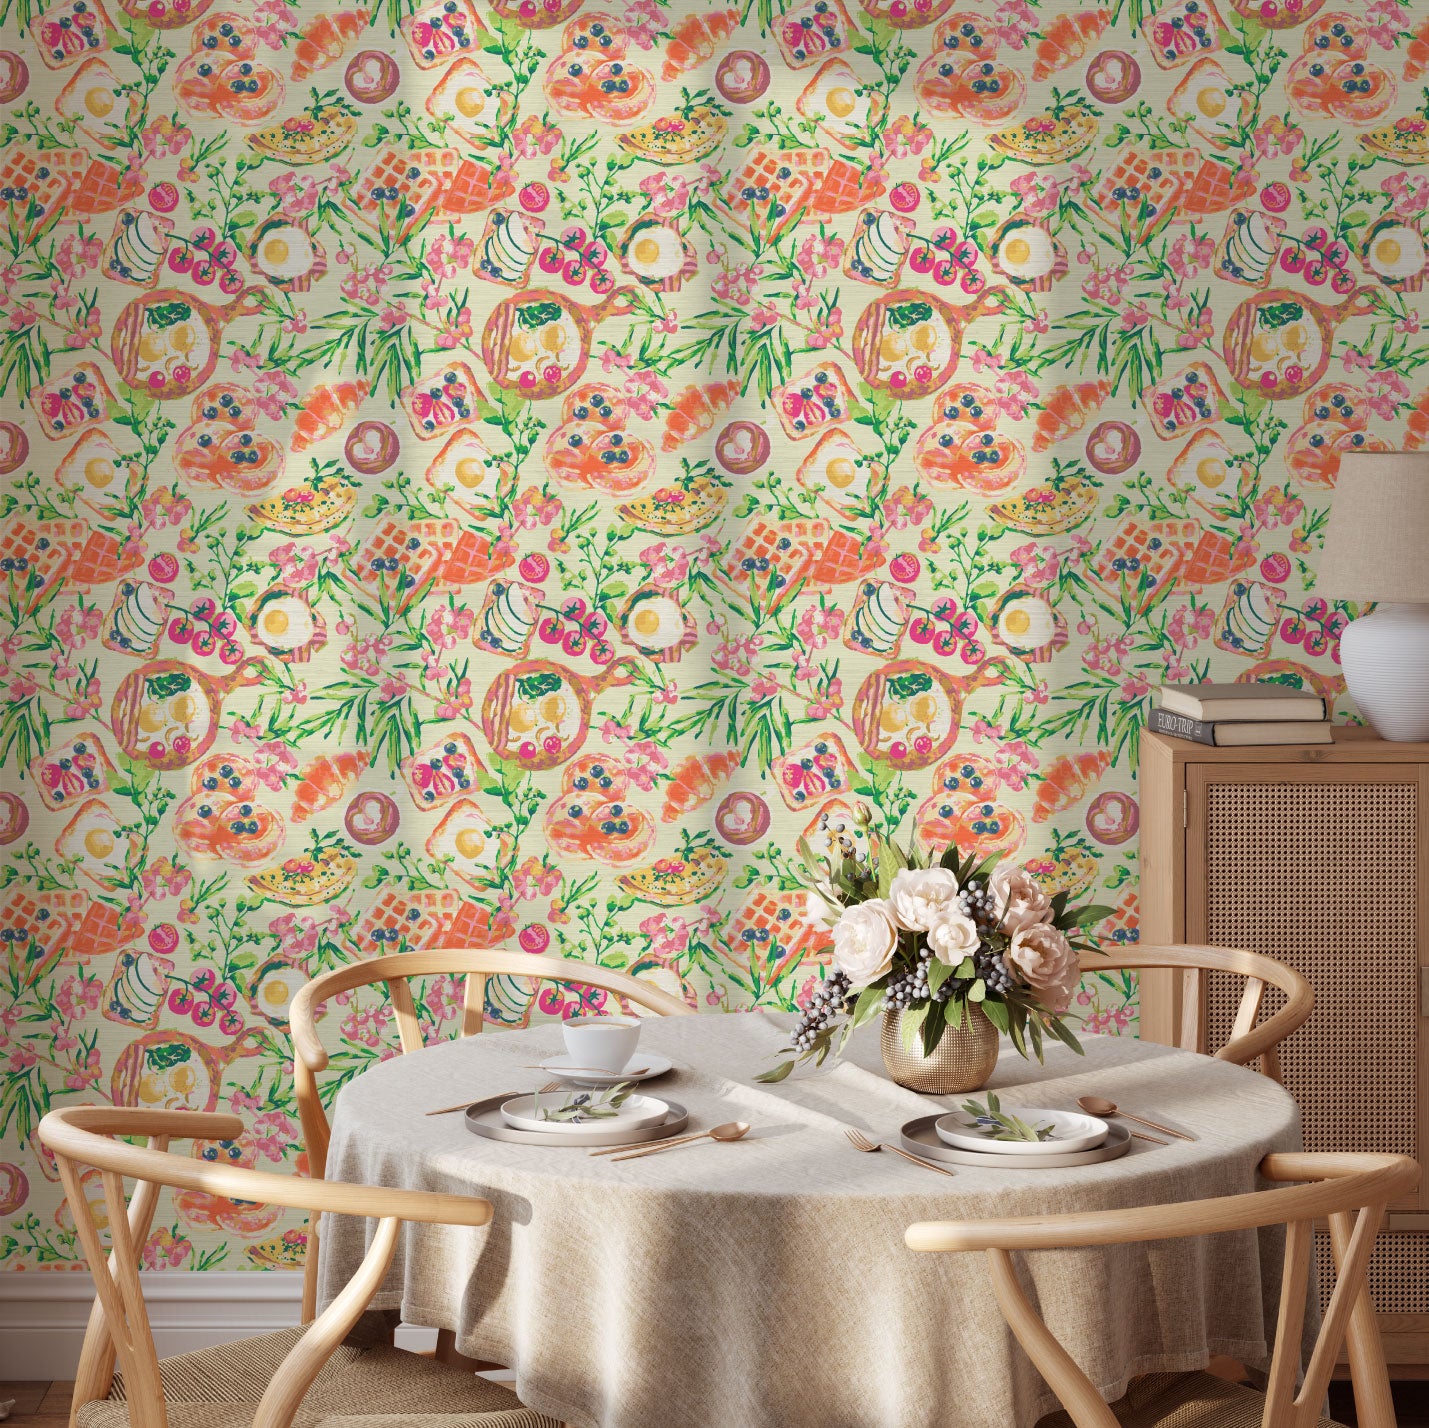 Printed grasscloth wallpaper  breakfast foods: eggs, bacon, waffles, pancakes, toast fresh fruit vegetables flowers tossed allover custom print Natural Textured Eco-Friendly Non-toxic High-quality  Sustainable practices Sustainability Interior Design Wall covering Bold retro multi colored bright chic nook kitchen restaurant.